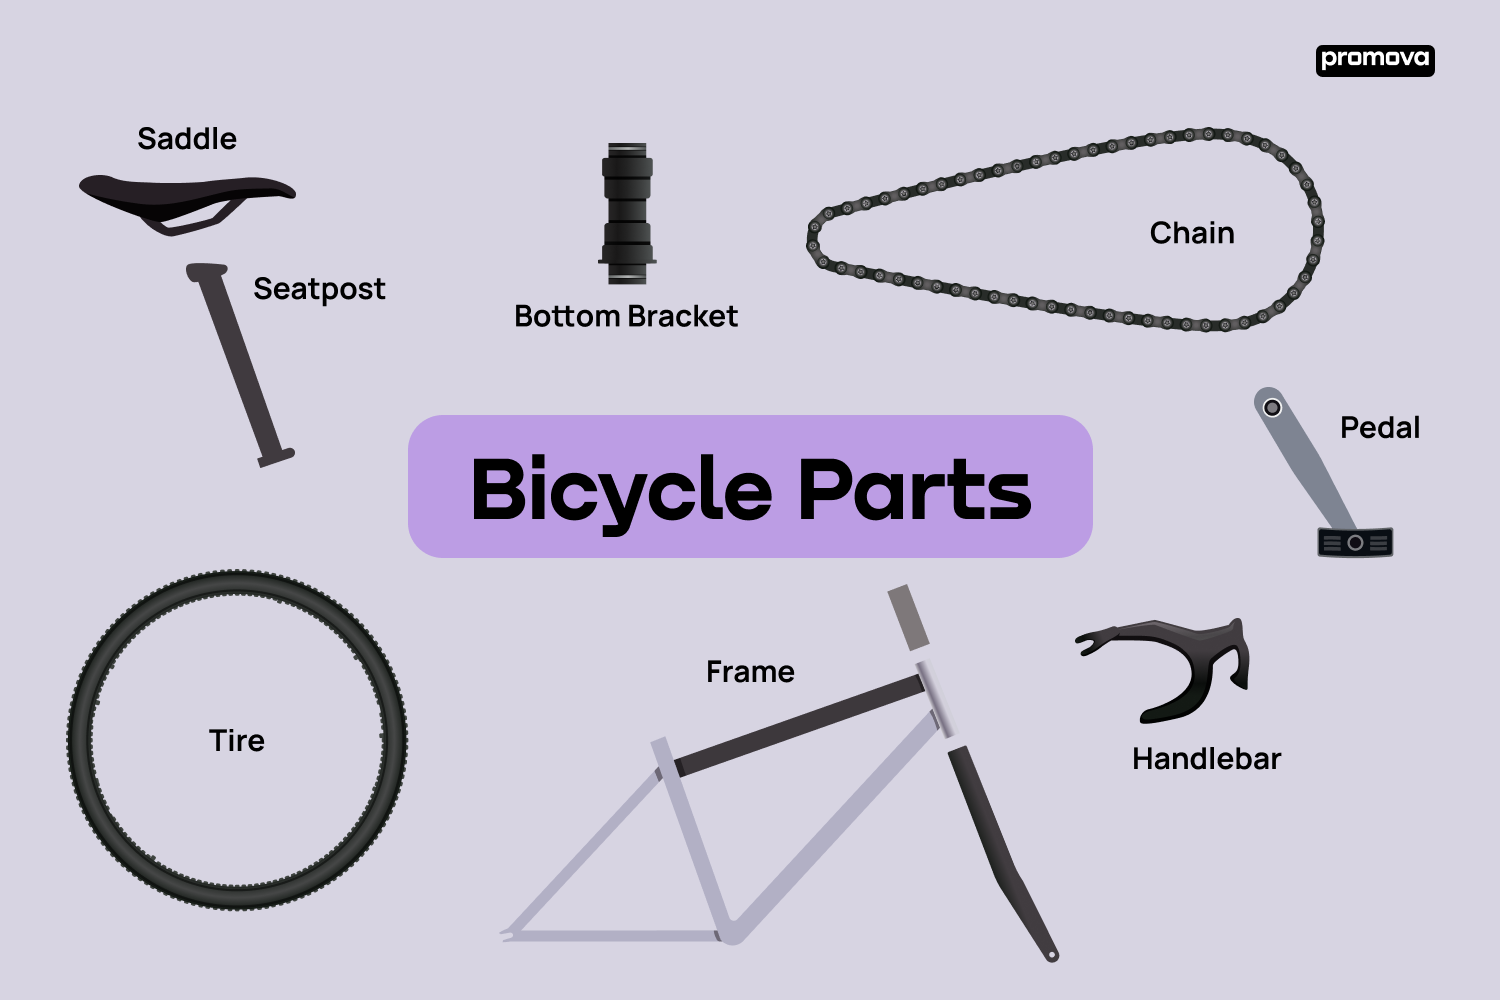 Mastering Bicycle Anatomy: Comprehensive Bicycle Parts Names Guide